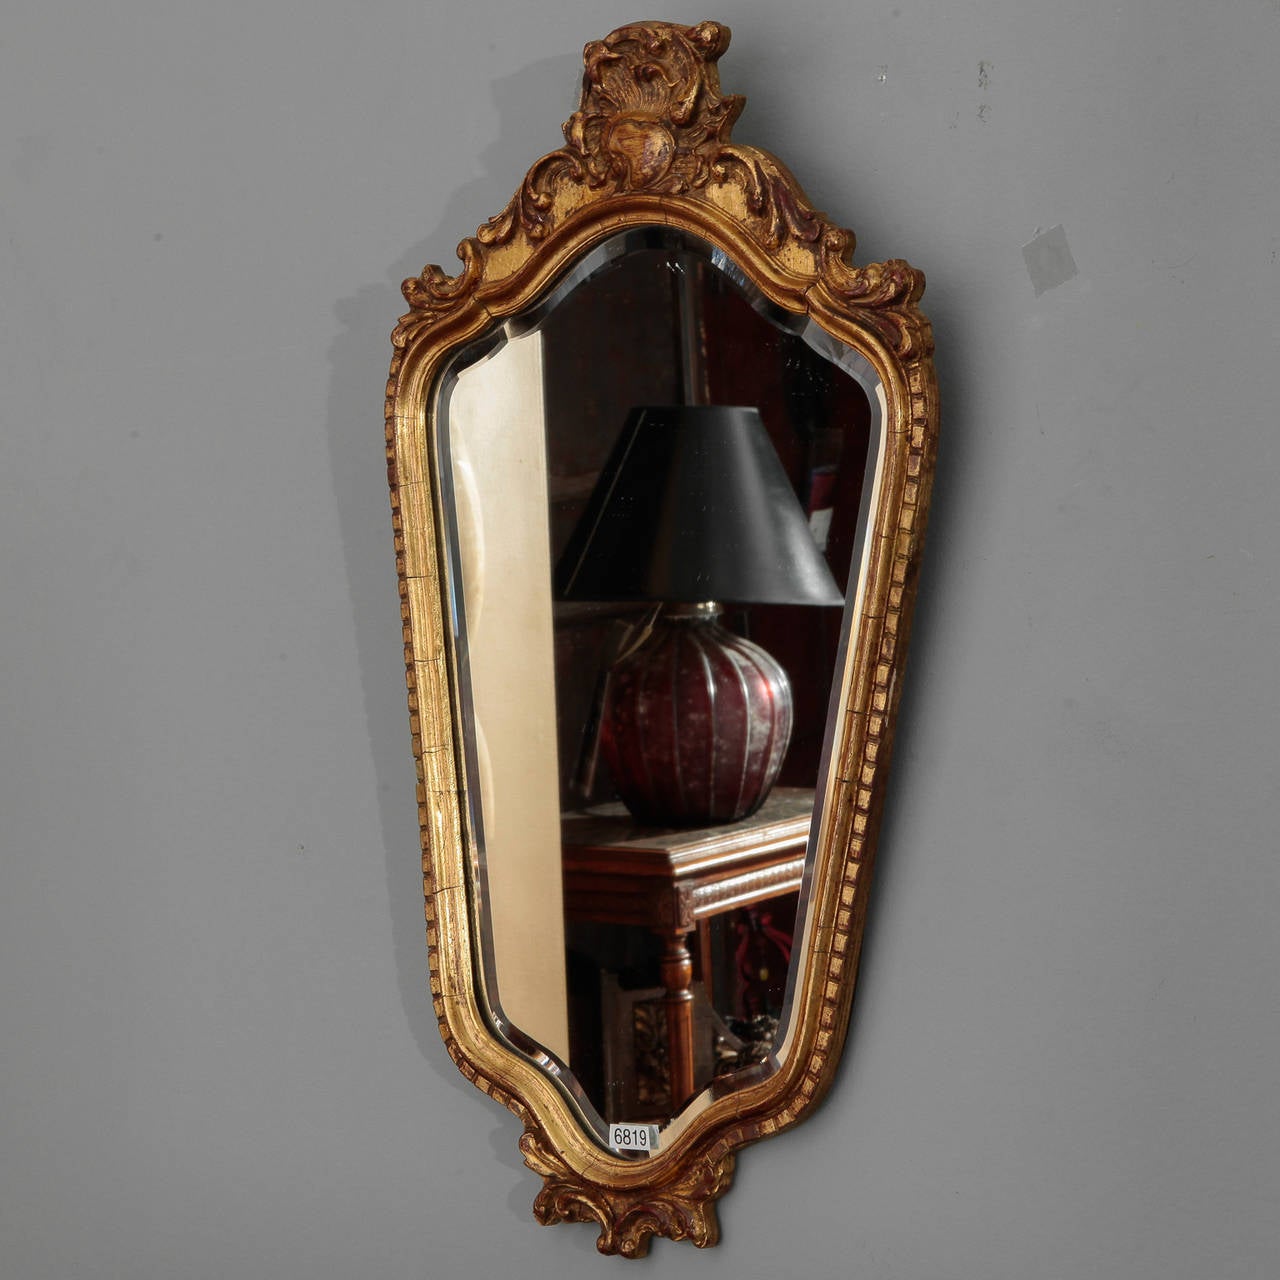 French shield shaped beveled edge mirror with wood and gesso frame in dark gilt finish and foliate crown, circa 1930s.  Actual Mirror Size:  18.25” h x 11.75” w